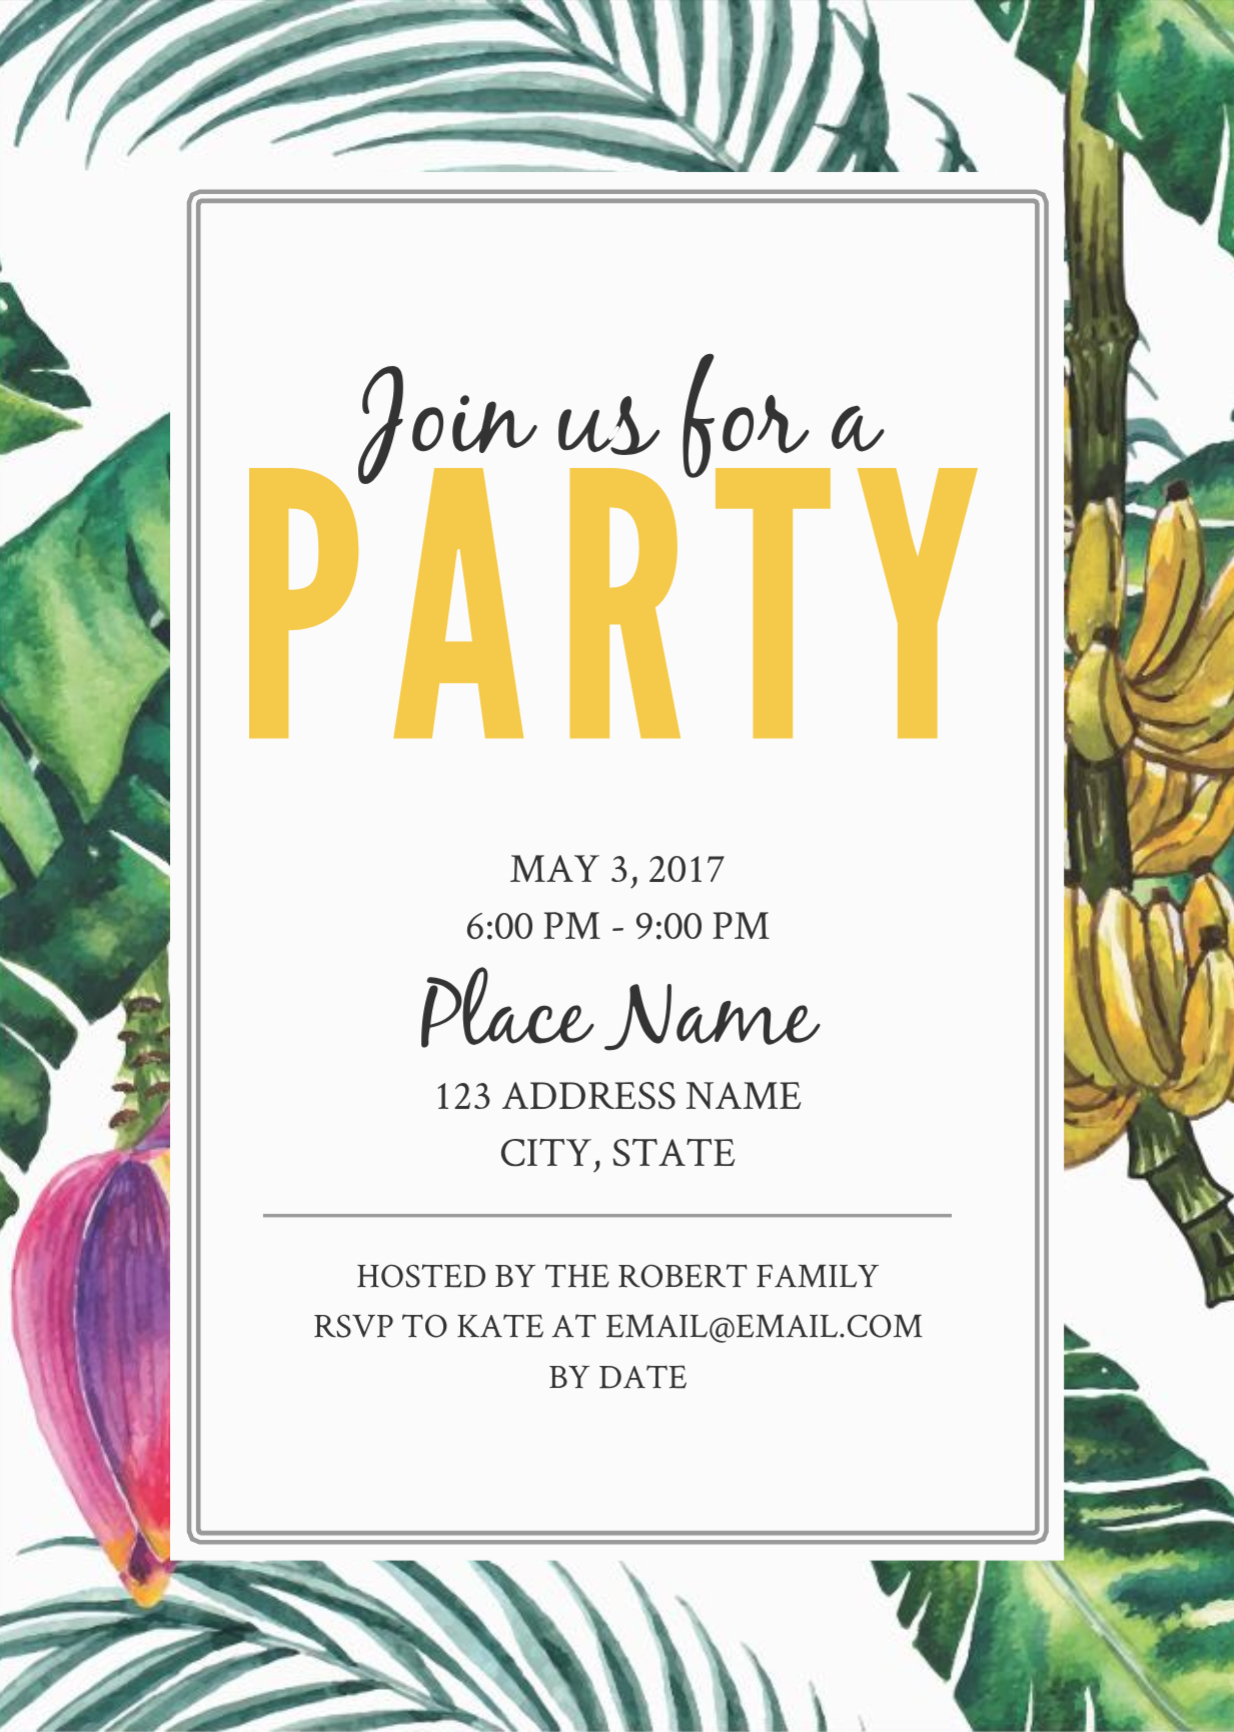 free online party planner